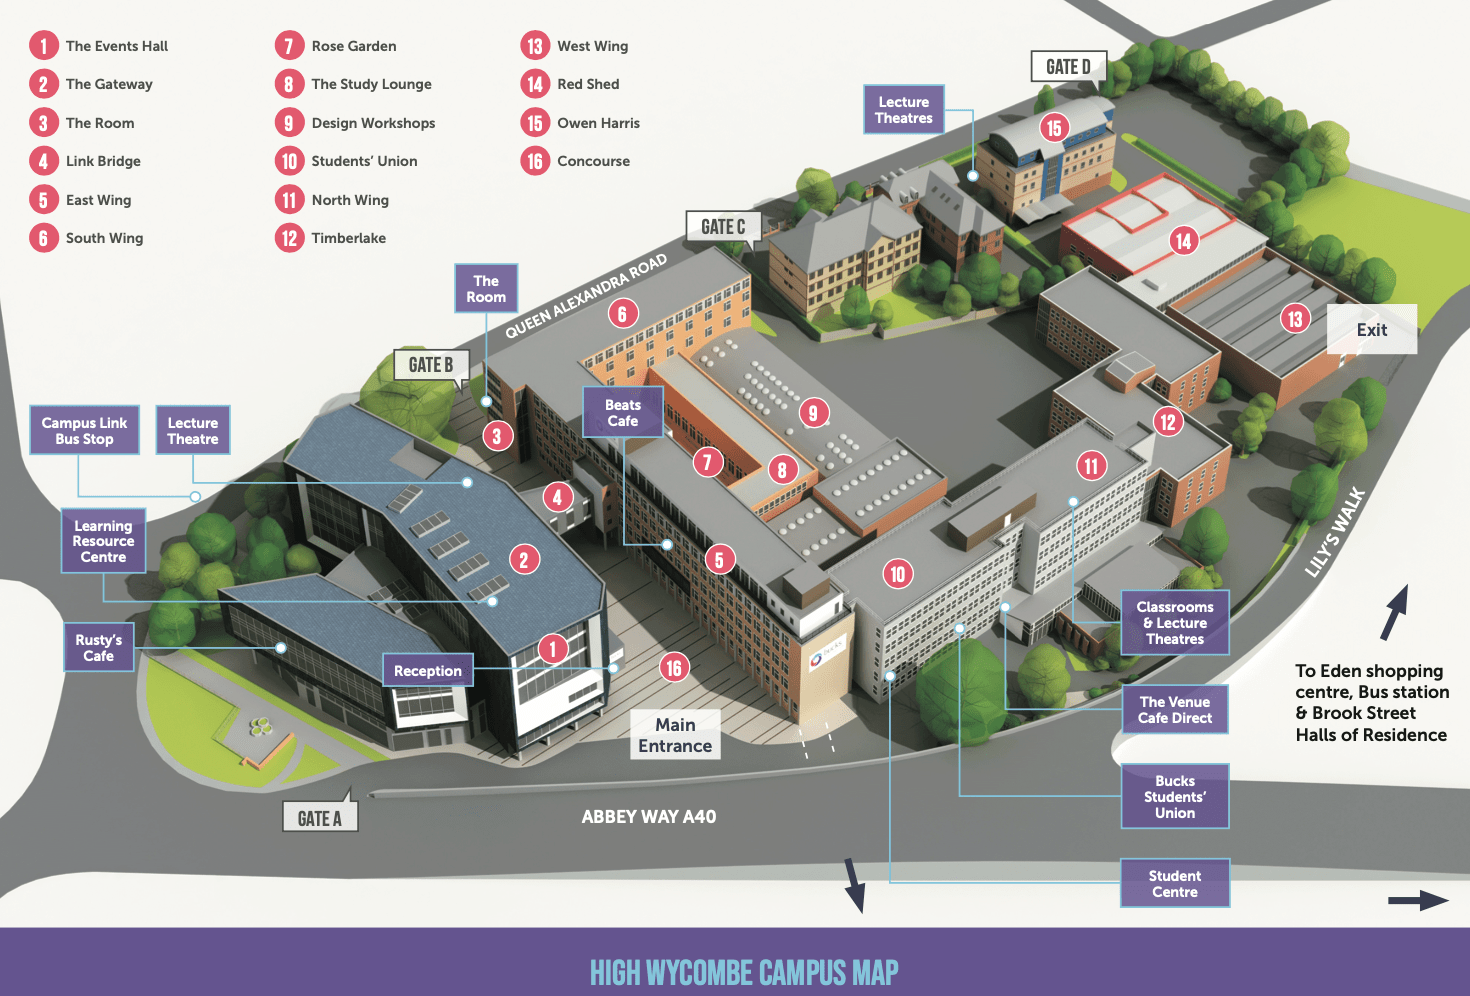 Infographic map of BNU's High Wycombe Campus